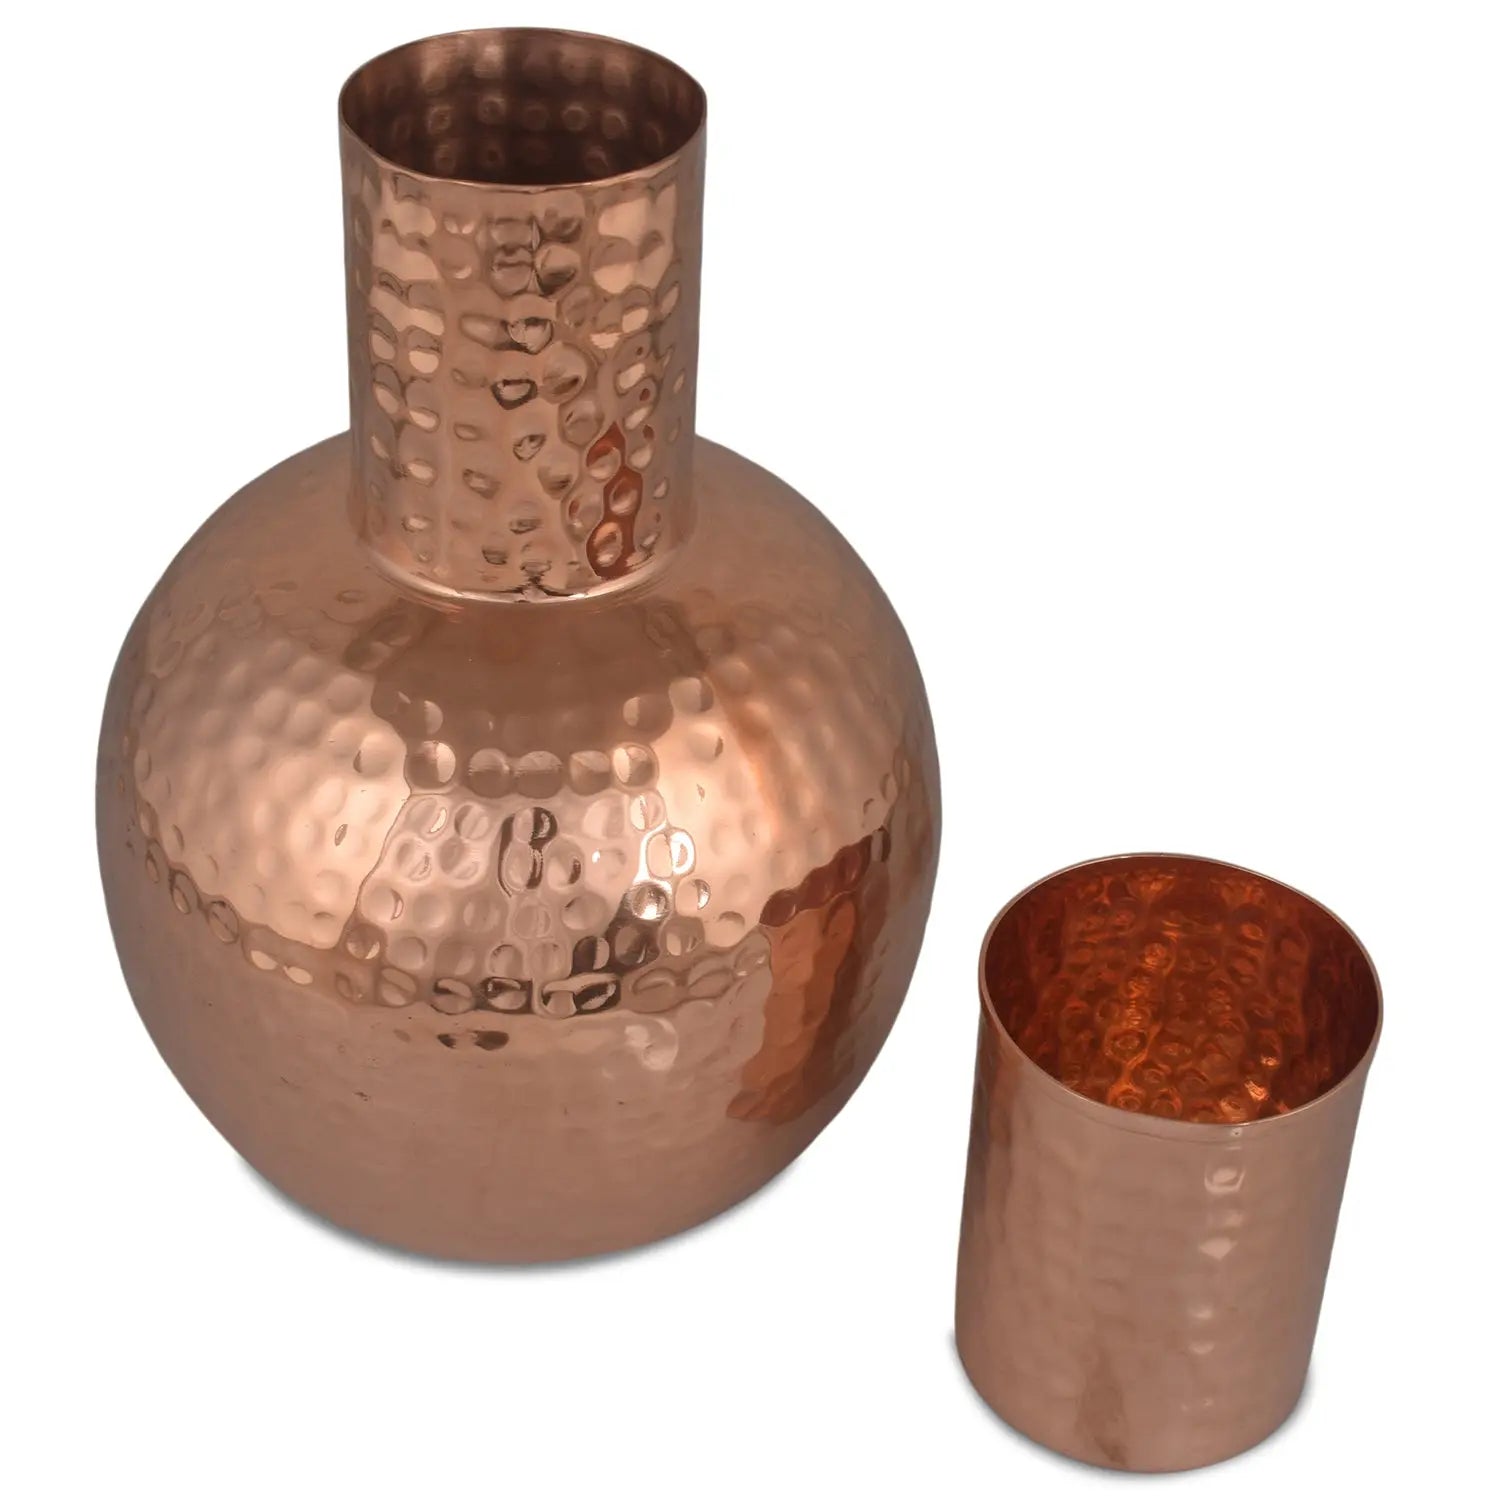 Pure Copper Surai Glass Hammered Design Bedroom Water Copper Bottle with Inbuilt Glass, 2900 ml (Brown) - CROCKERY WALA AND COMPANY 